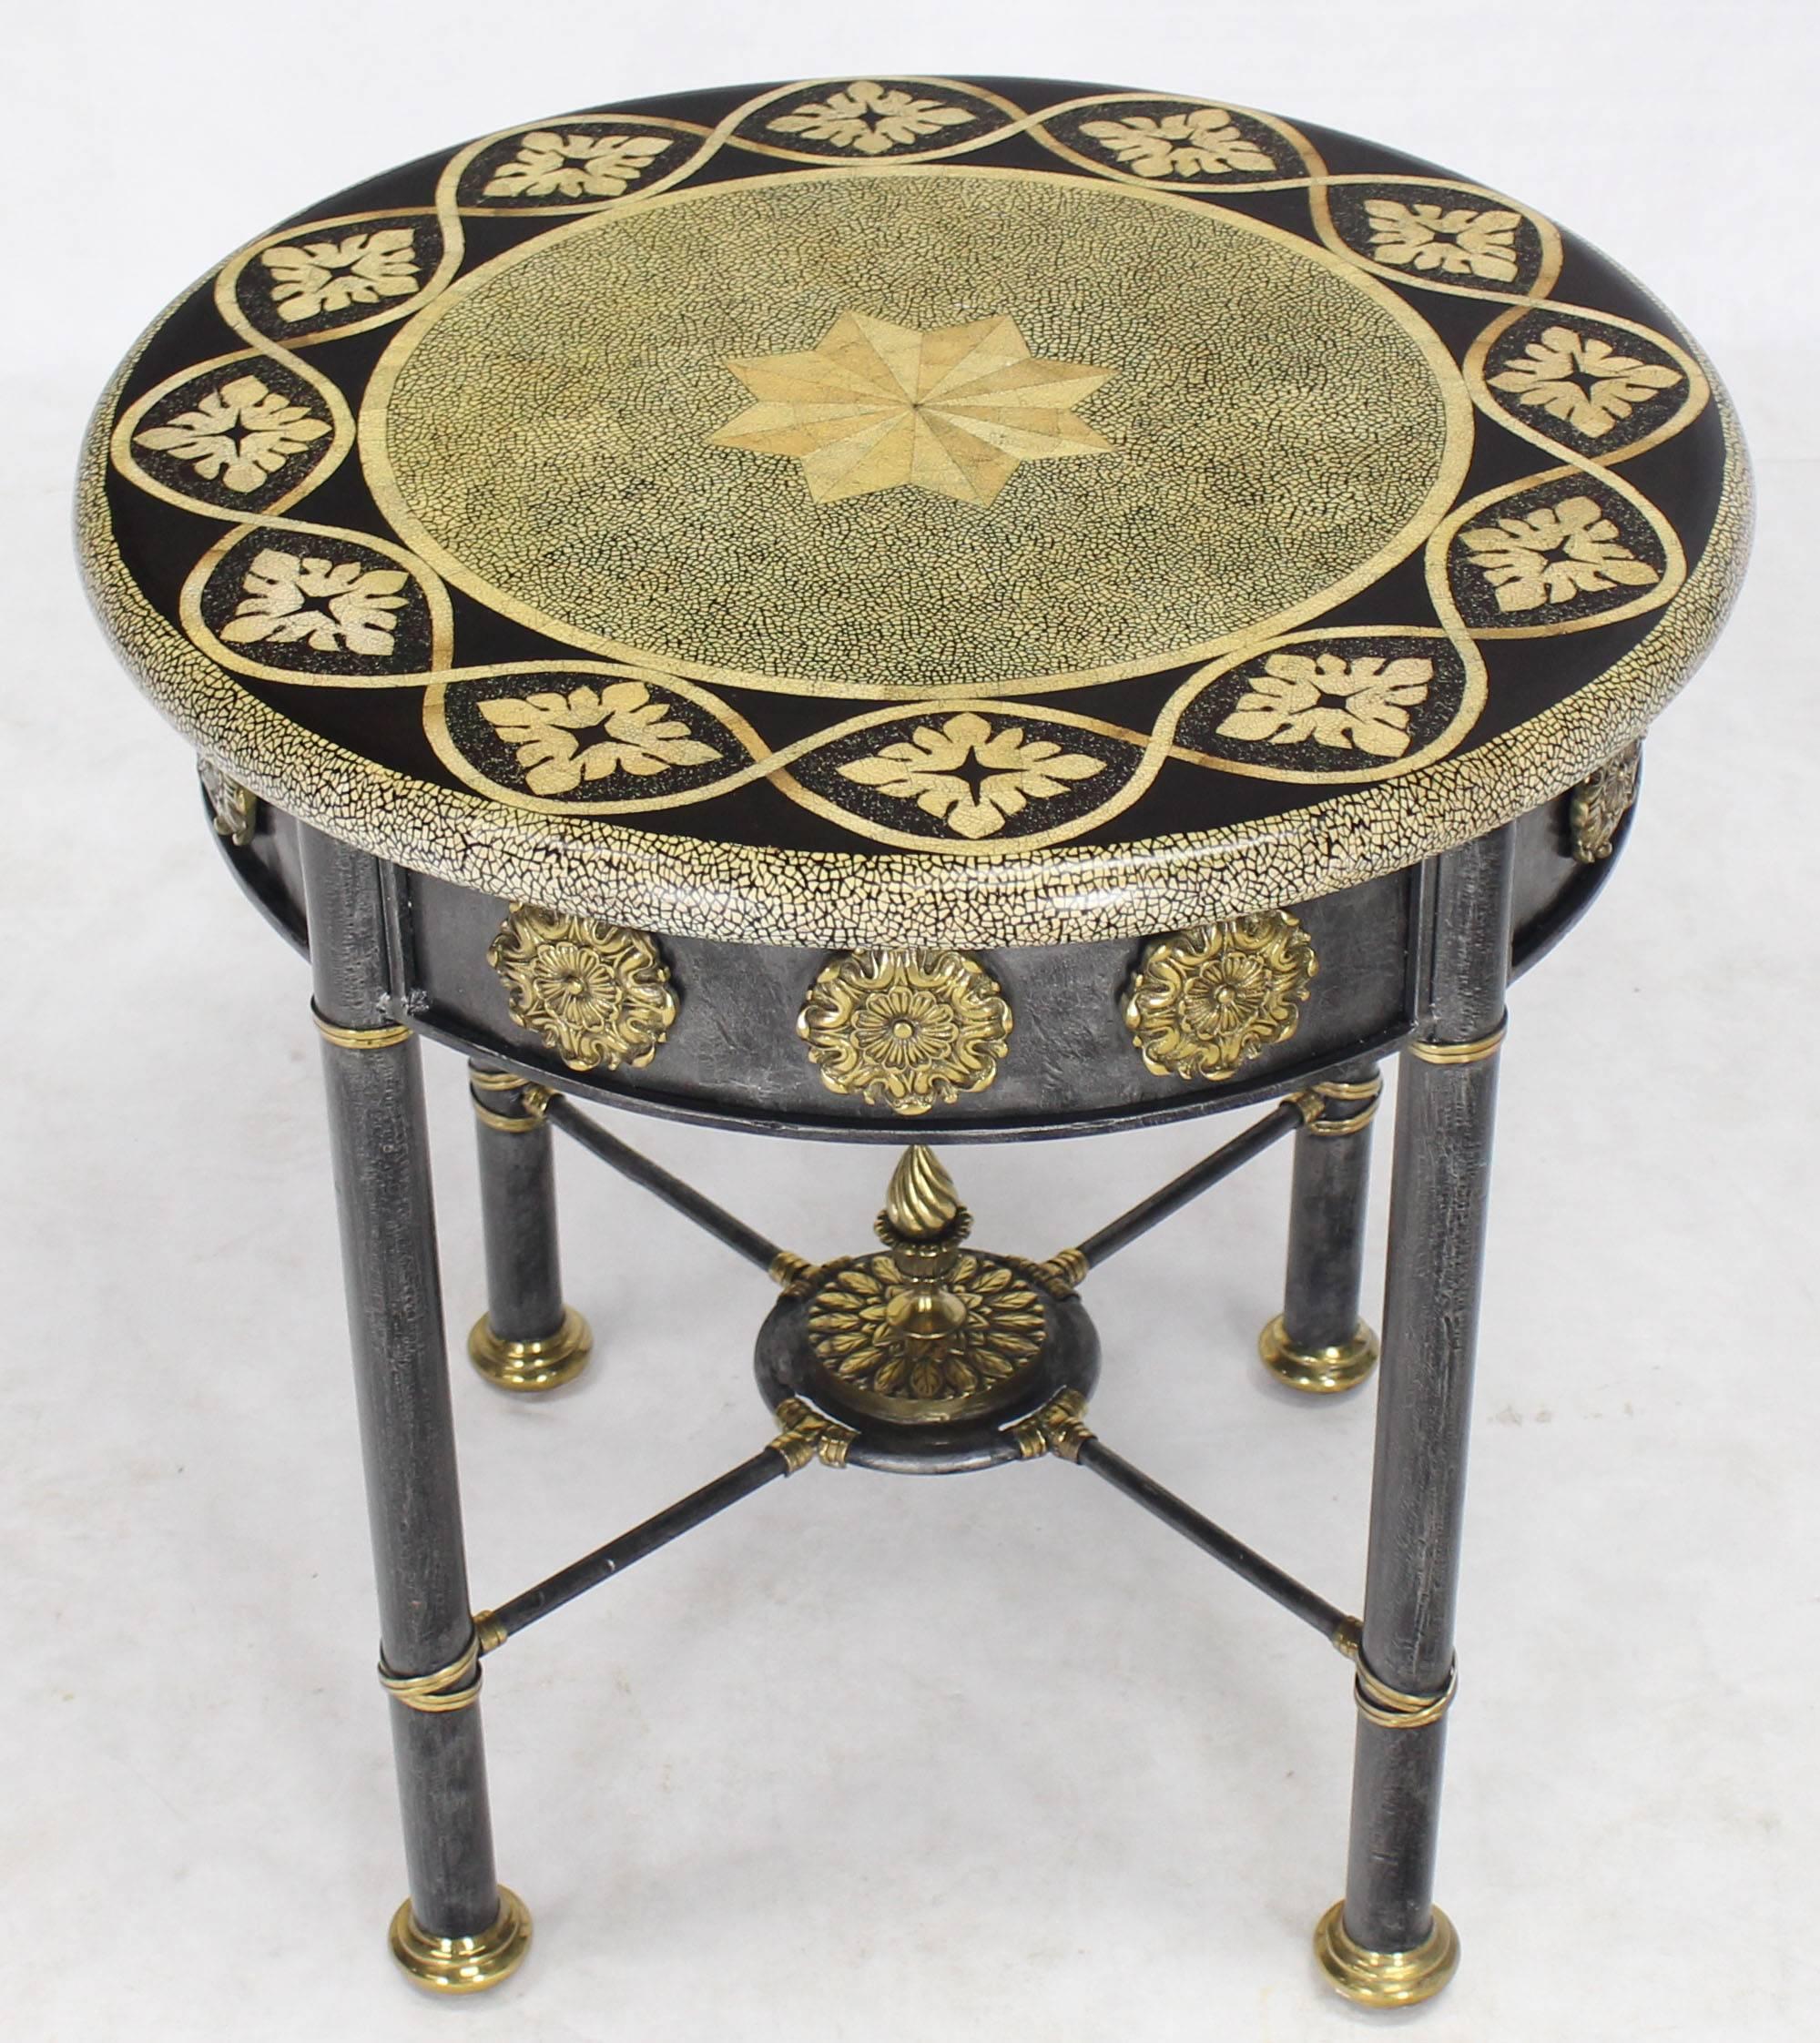 Cast Round Faux Egg Shell Decorated Bronze Ormolu Decorated Round Gueridon Table For Sale